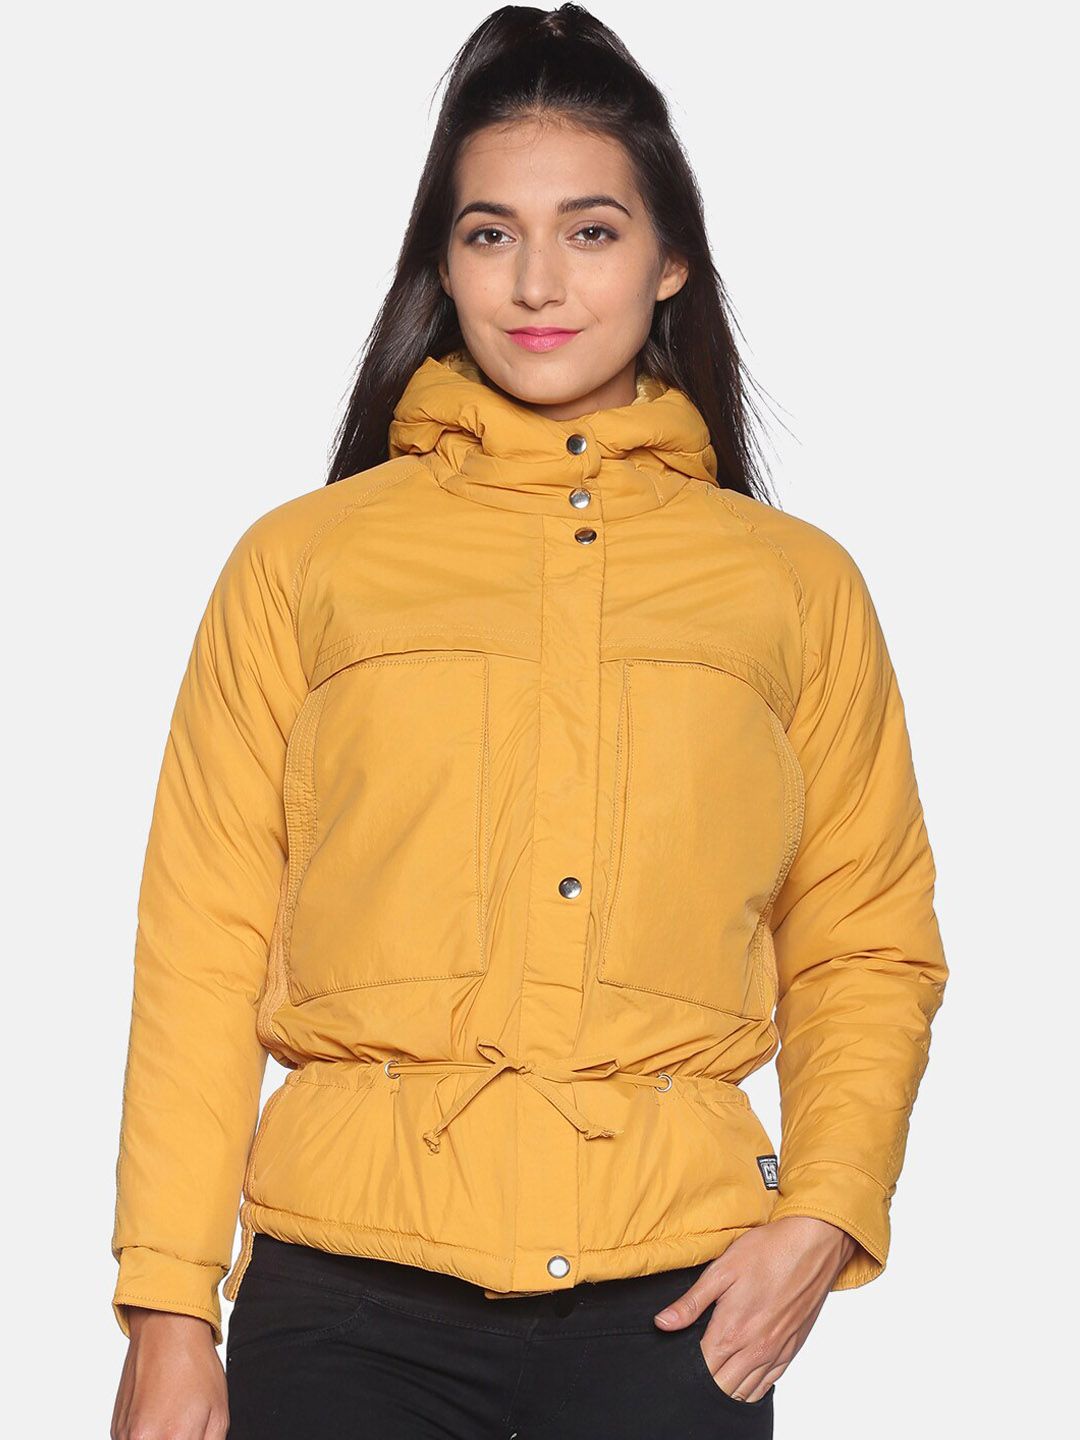 Campus Sutra Women Yellow Solid Windcheater Parka Jacket Price in India